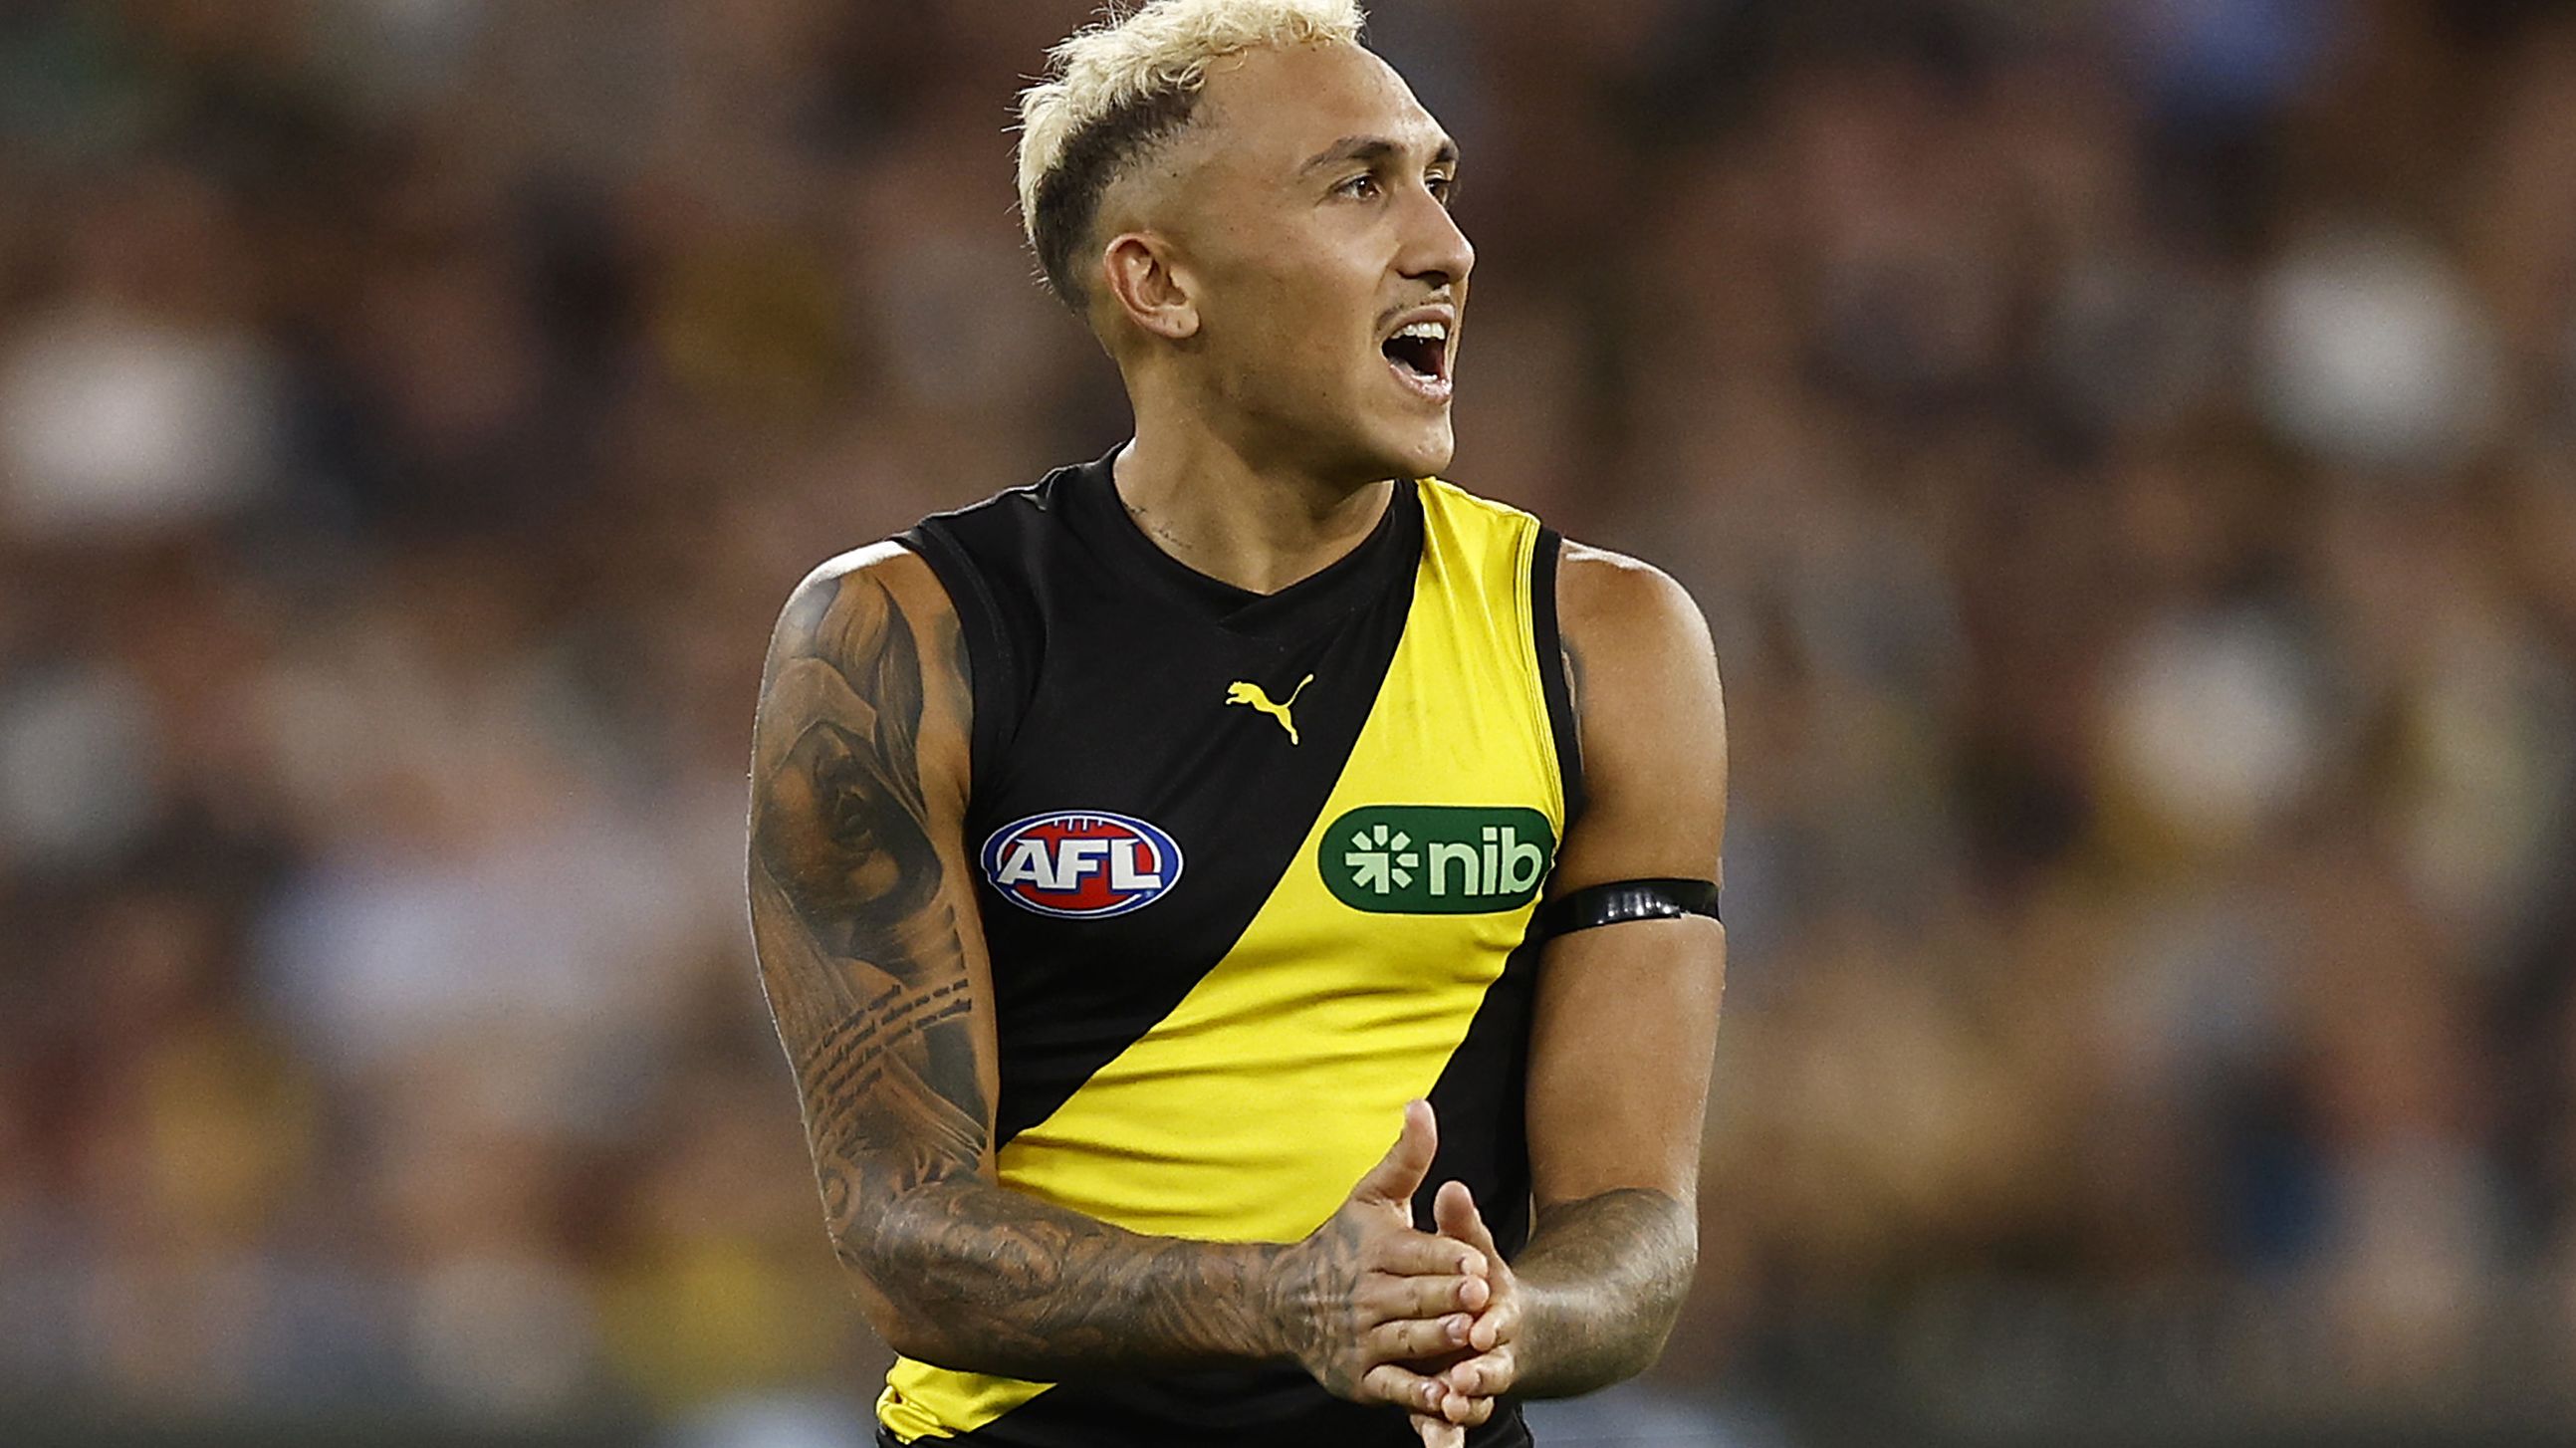 MELBOURNE, AUSTRALIA - MARCH 16: Shai Bolton of the Tigers reacts during the round one AFL match between Richmond Tigers and Carlton Blues at Melbourne Cricket Ground, on March 16, 2023, in Melbourne, Australia. (Photo by Daniel Pockett/Getty Images)